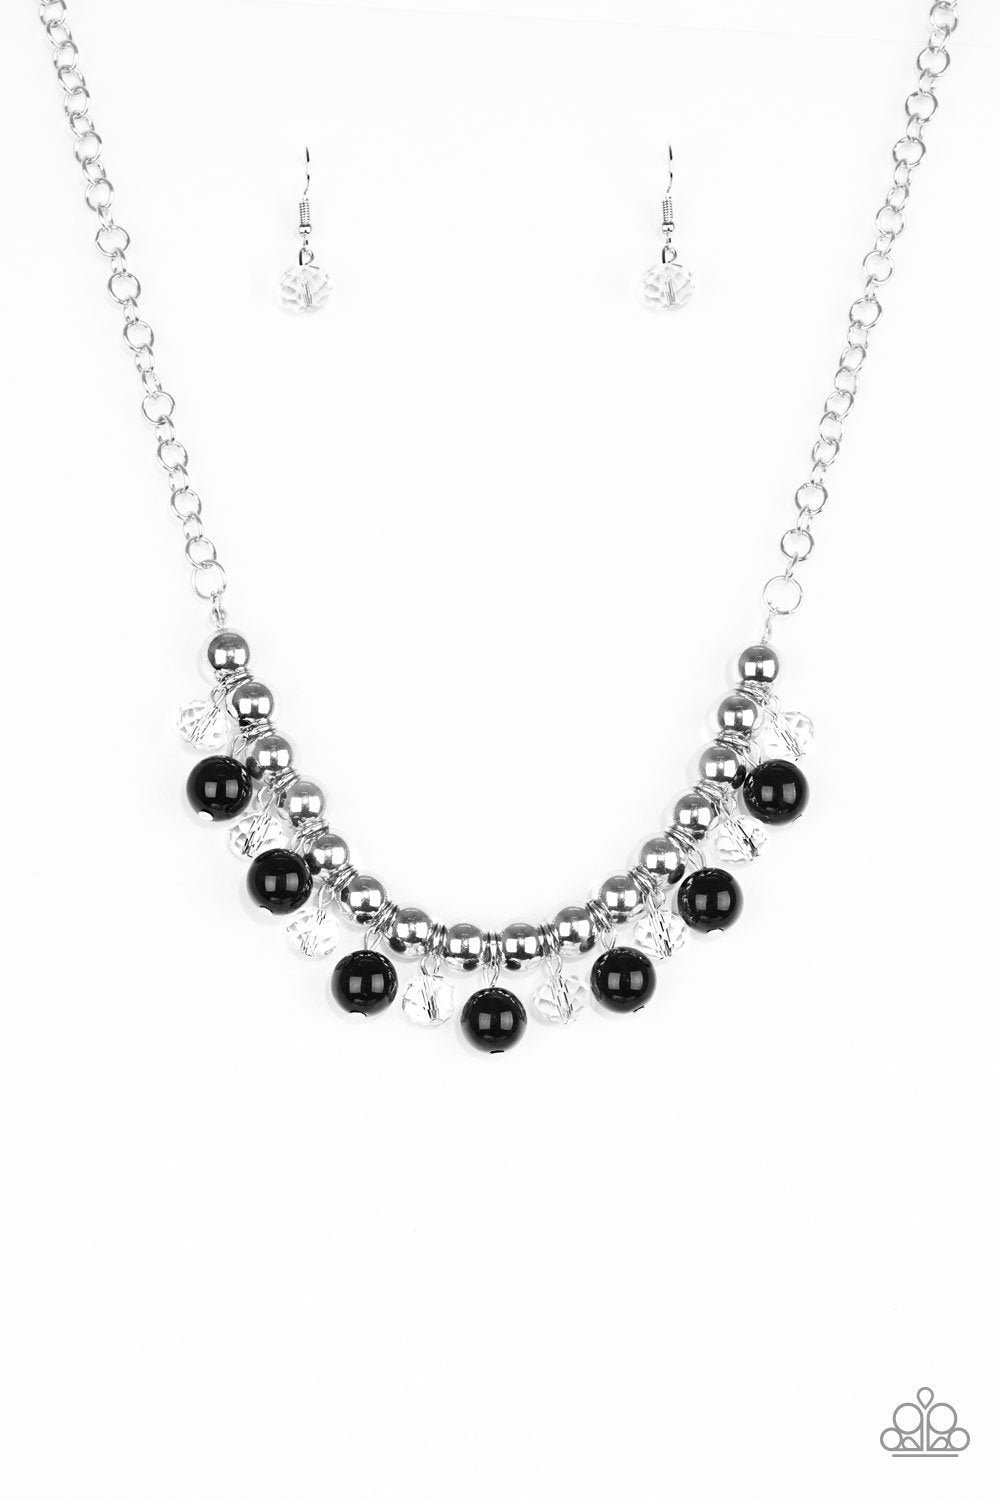 Power Trip Silver and Black Necklace - Paparazzi Accessories-CarasShop.com - $5 Jewelry by Cara Jewels